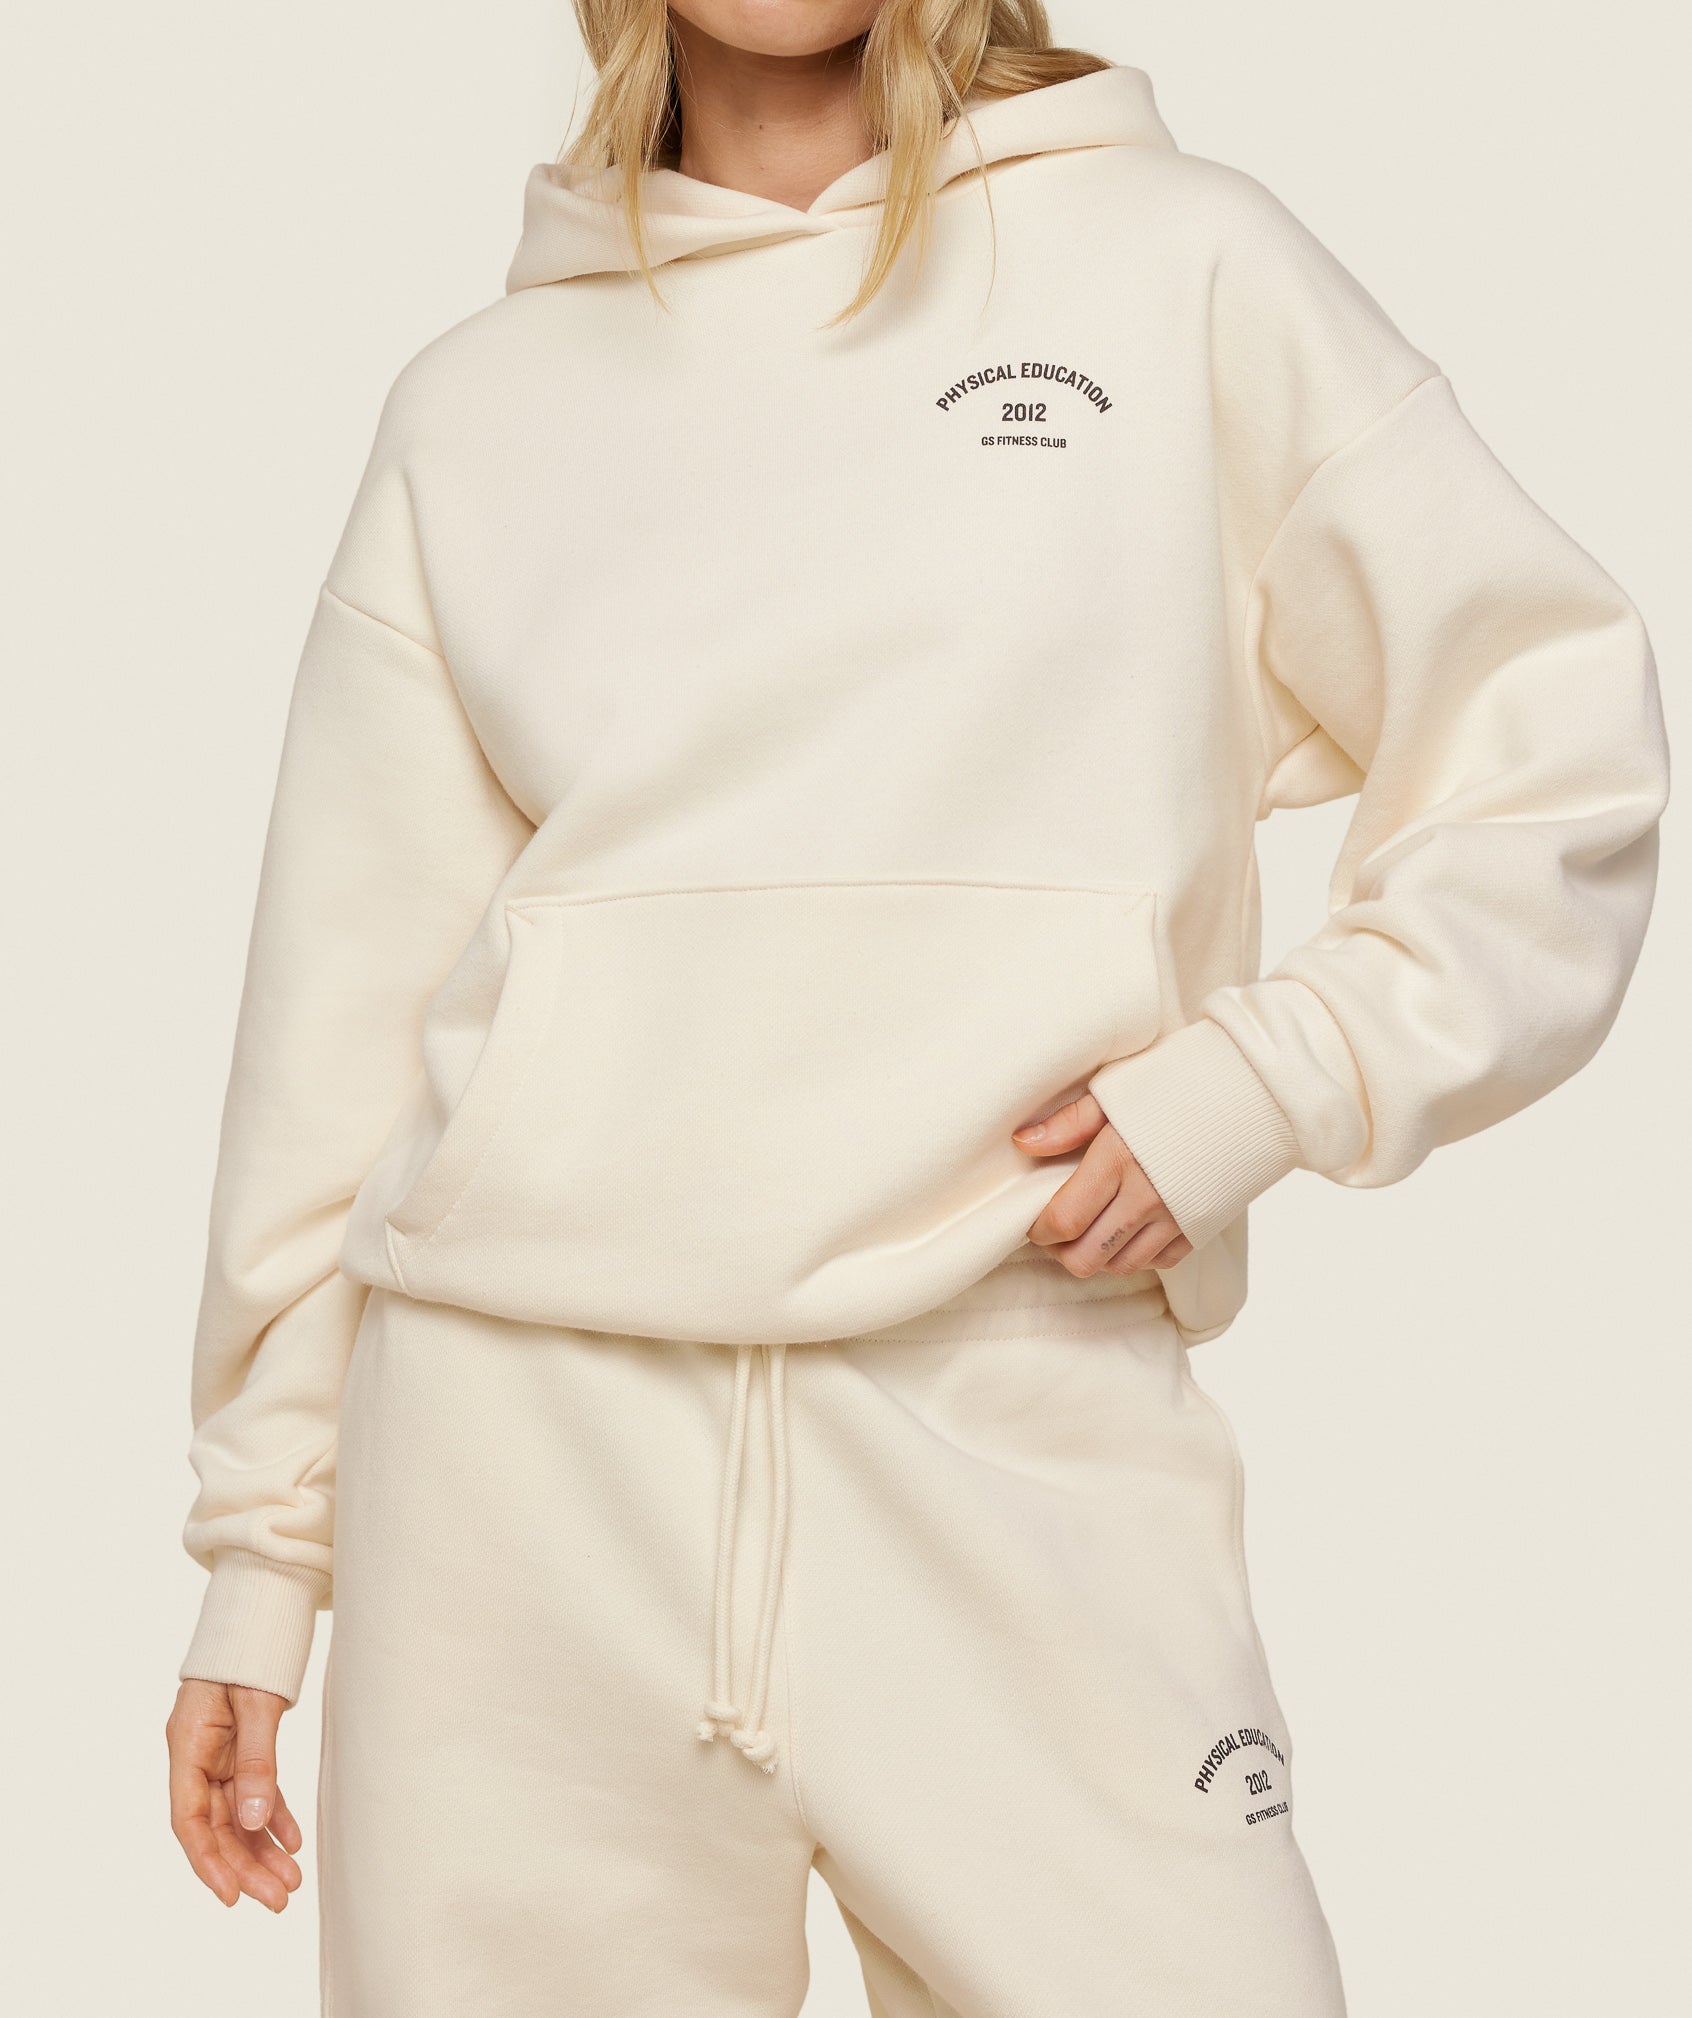 Phys Ed Graphic Hoodie in Ecru White - view 3